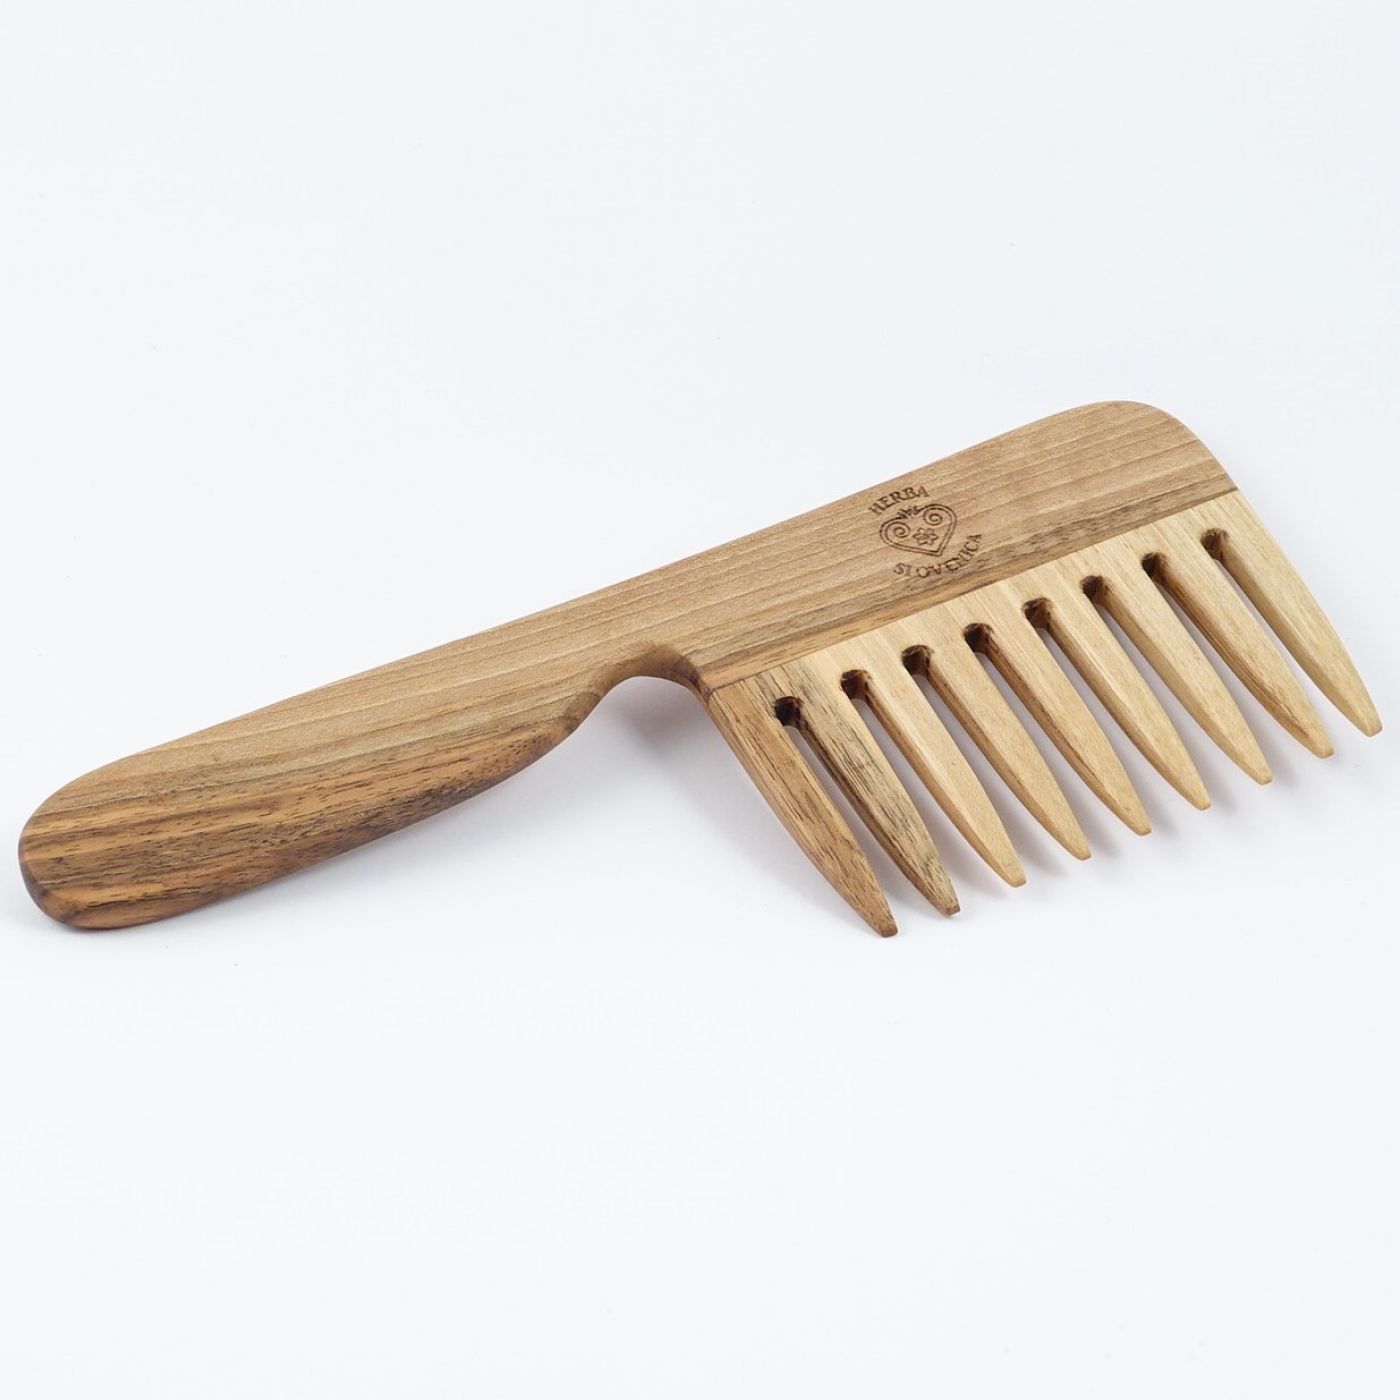 Wooden comb - large with handle